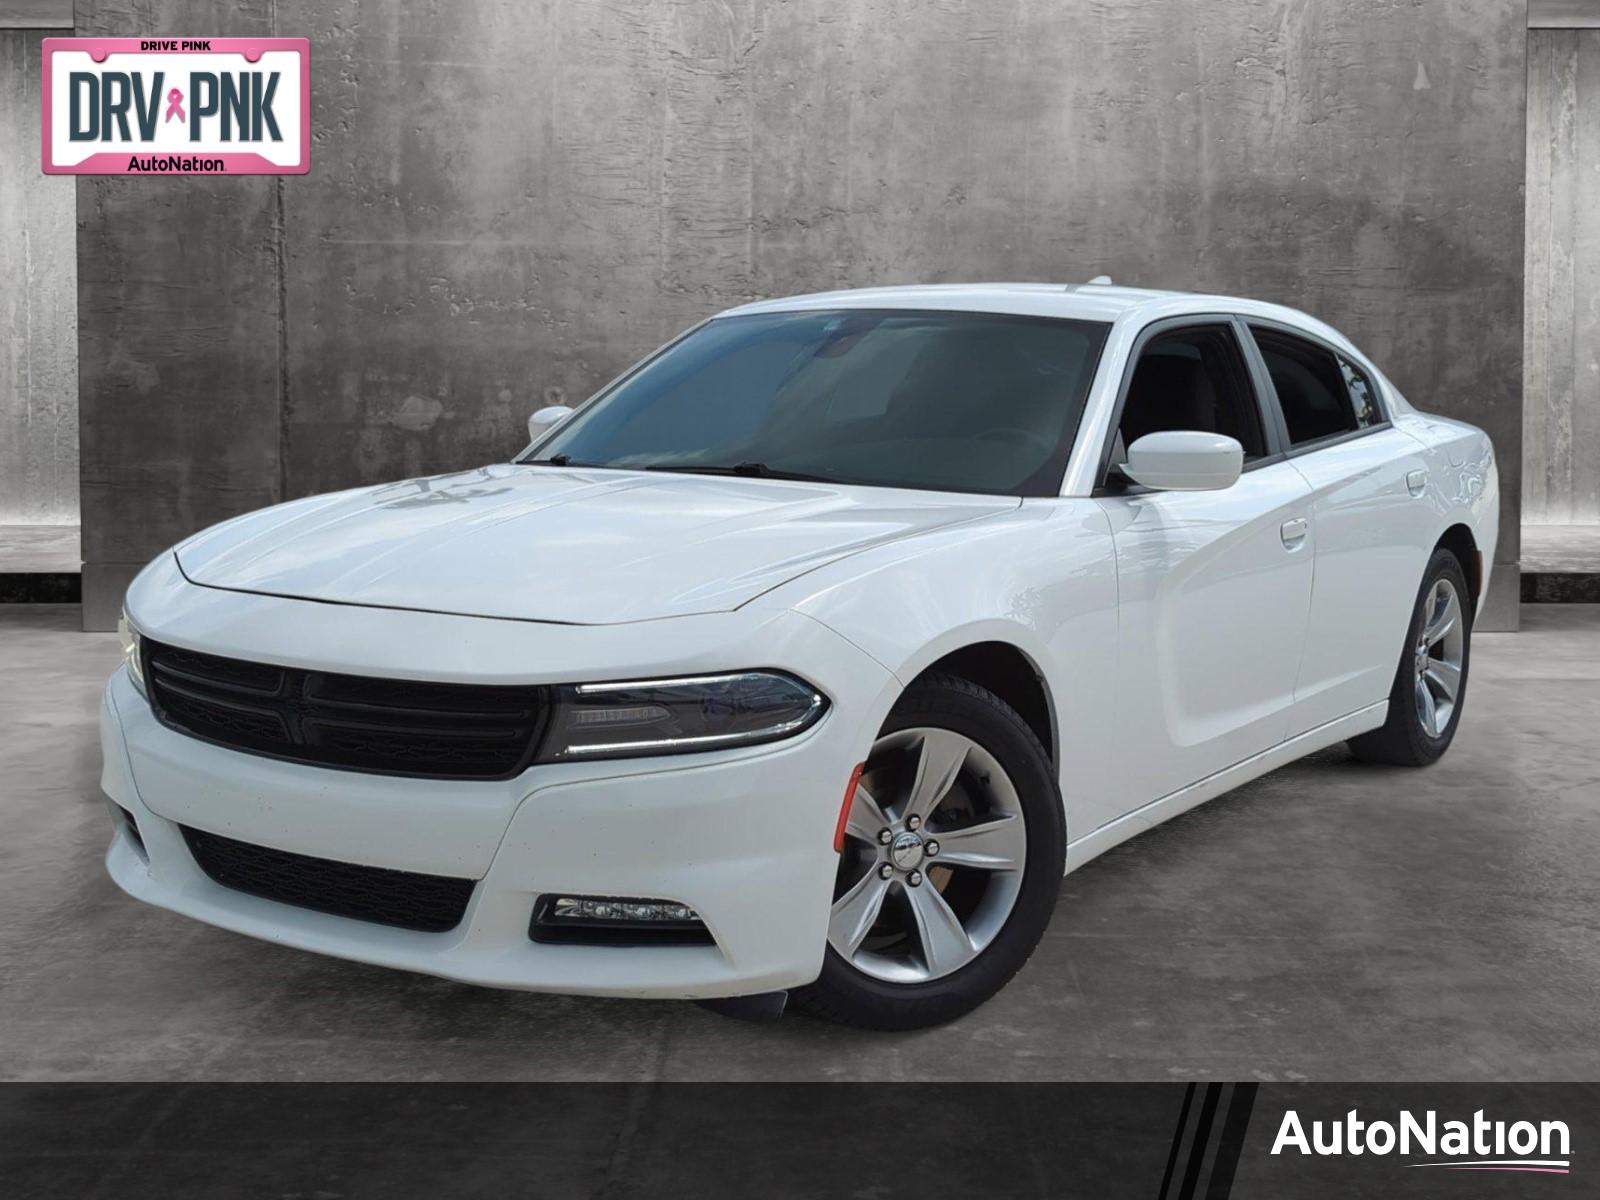 2018 Dodge Charger Vehicle Photo in Pembroke Pines, FL 33027